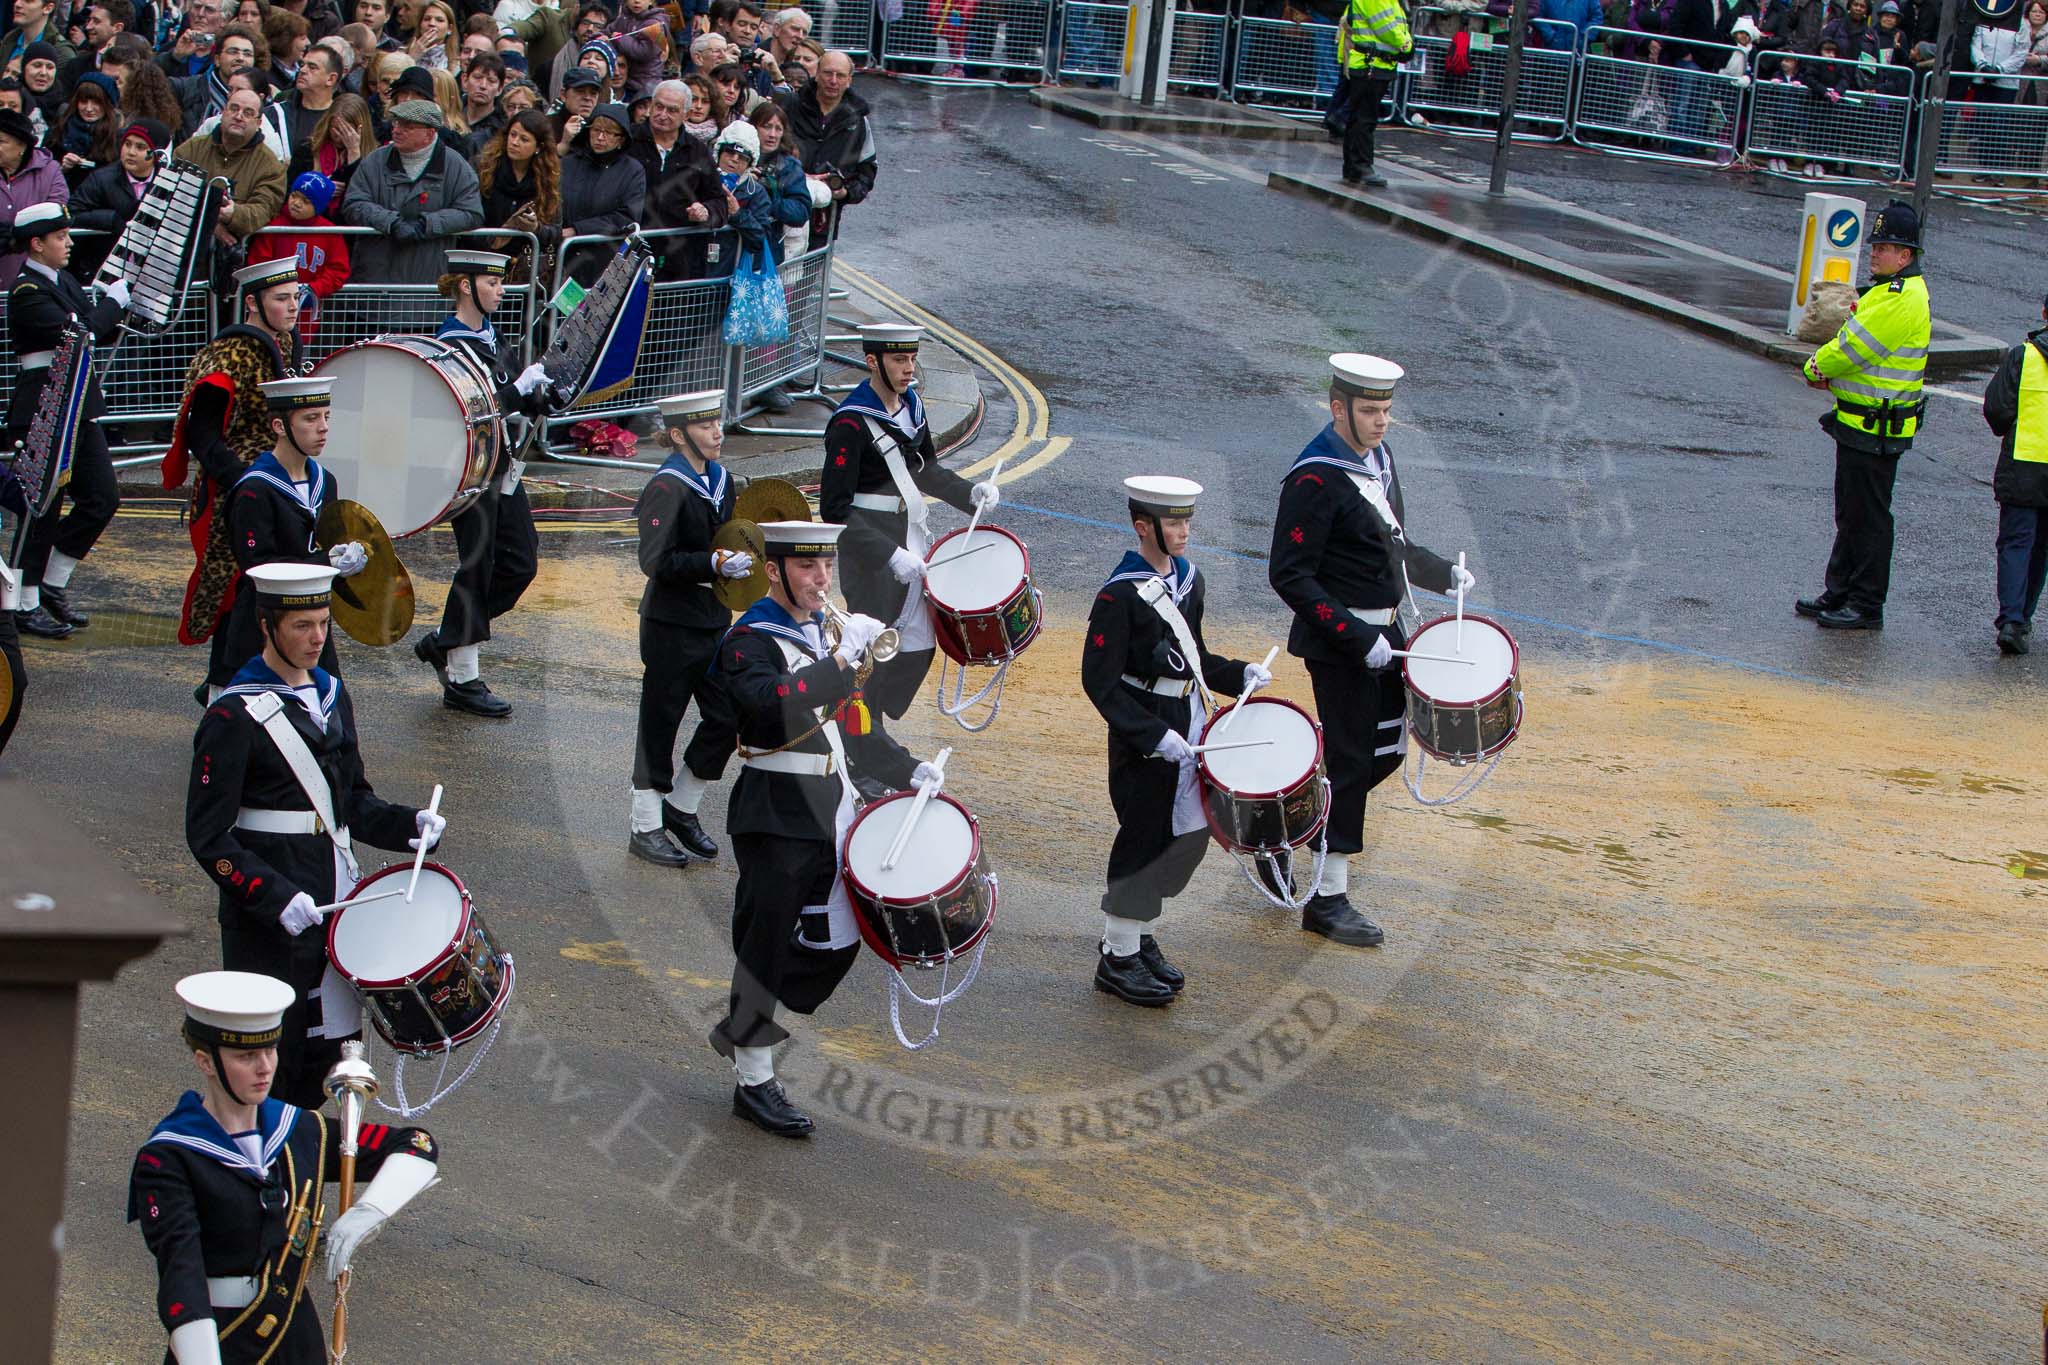 Lord Mayor's Show 2012: Entry 98 - Sea Cadet Corps Band..
Press stand opposite Mansion House, City of London,
London,
Greater London,
United Kingdom,
on 10 November 2012 at 11:45, image #1303